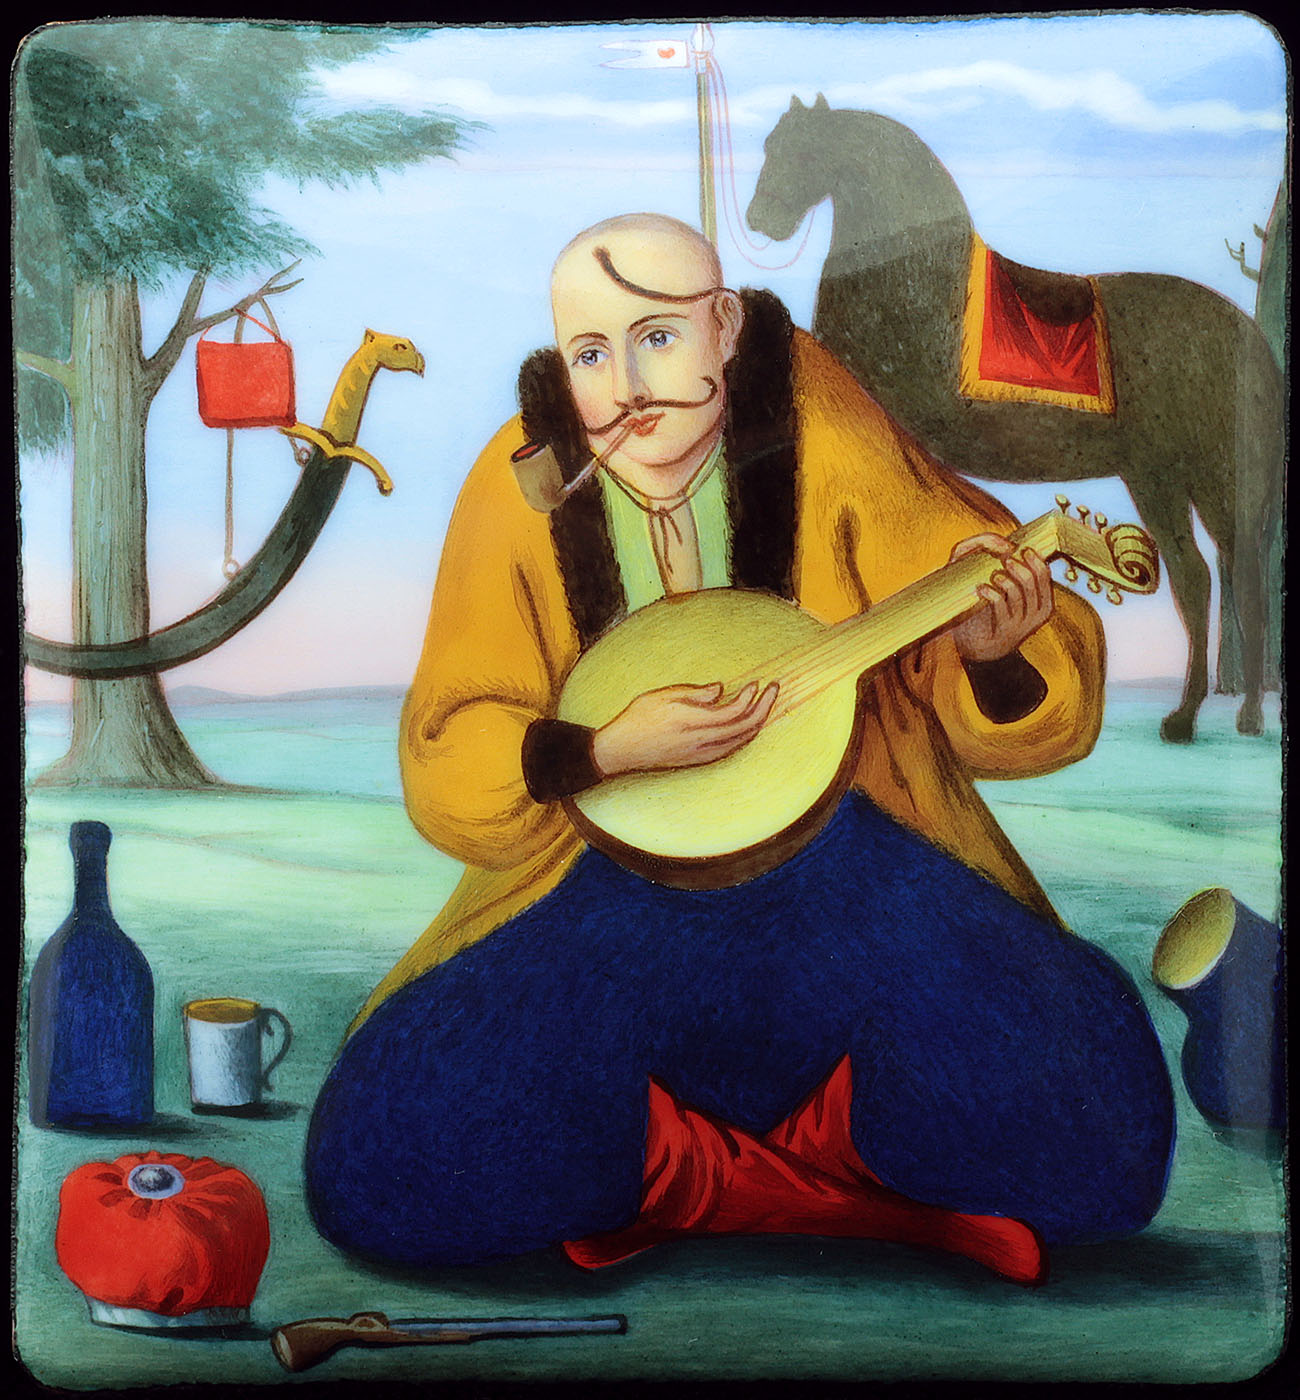 'Cossak-Bandurist' after uknown painter from 1836